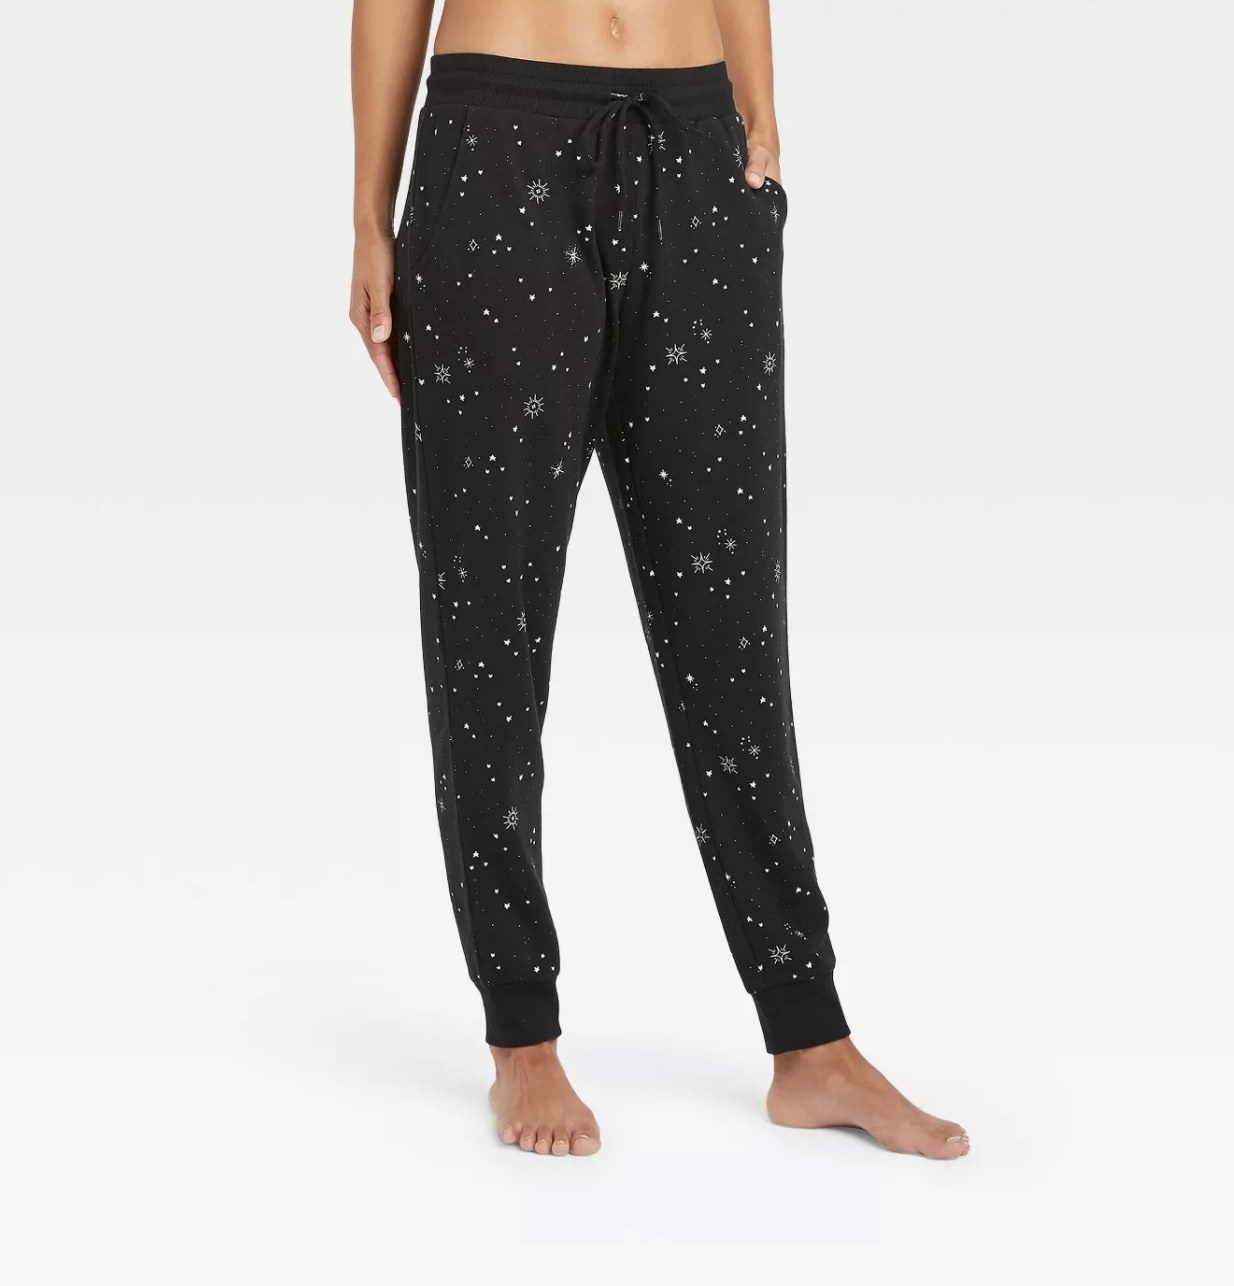 the star printed joggers